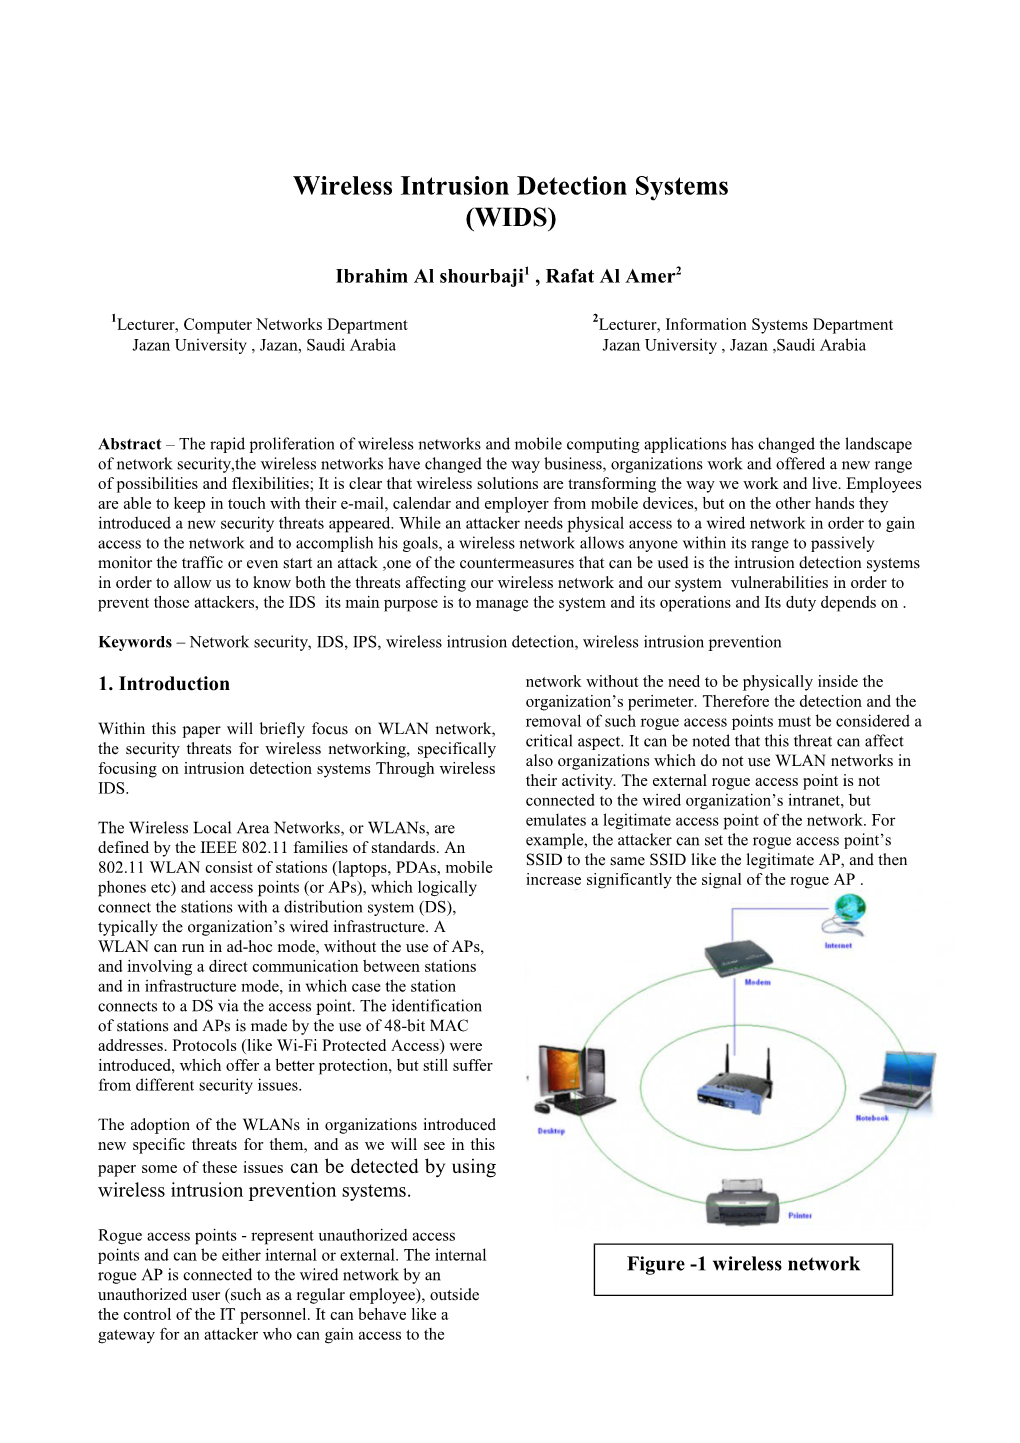 Wireless Intrusion Detection Systems (WIDS)